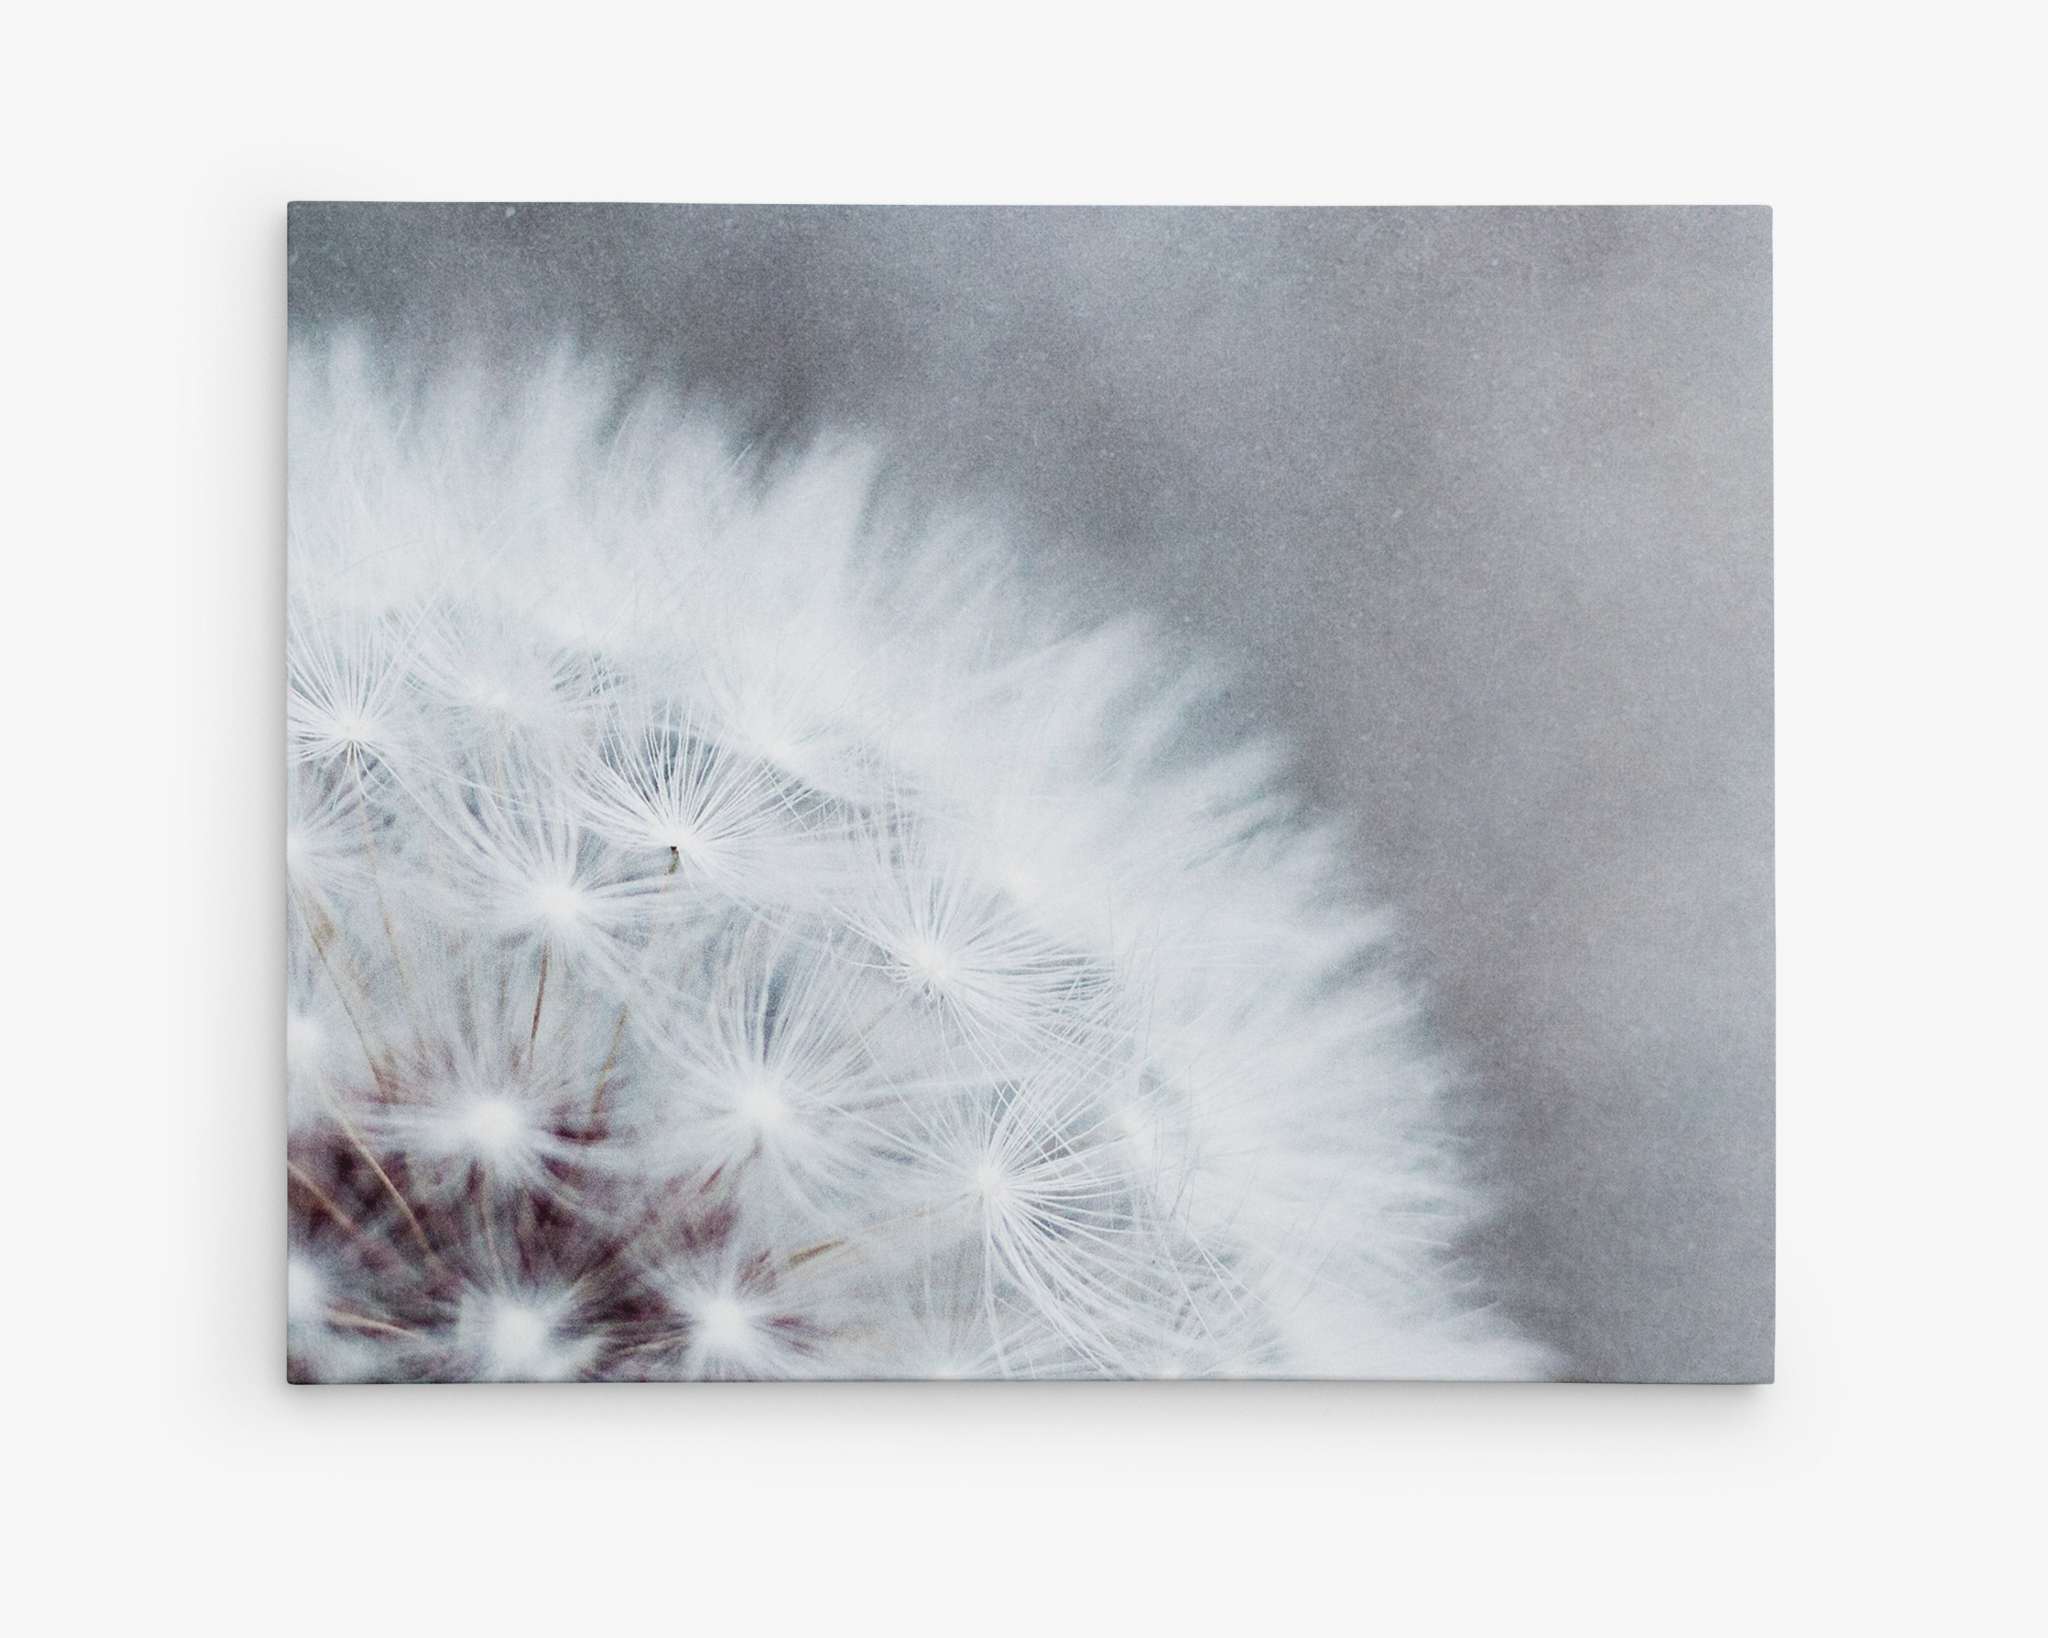 A close-up photograph of a dandelion seed head with delicate, white filaments visible, captured using macro lens photography. The background is blurred in soft shades of gray, emphasizing the intricate details of the dandelion—perfect for showcasing as Offley Green's Grey Botanical Canvas Wall Art, 'Dandelion Queen'.